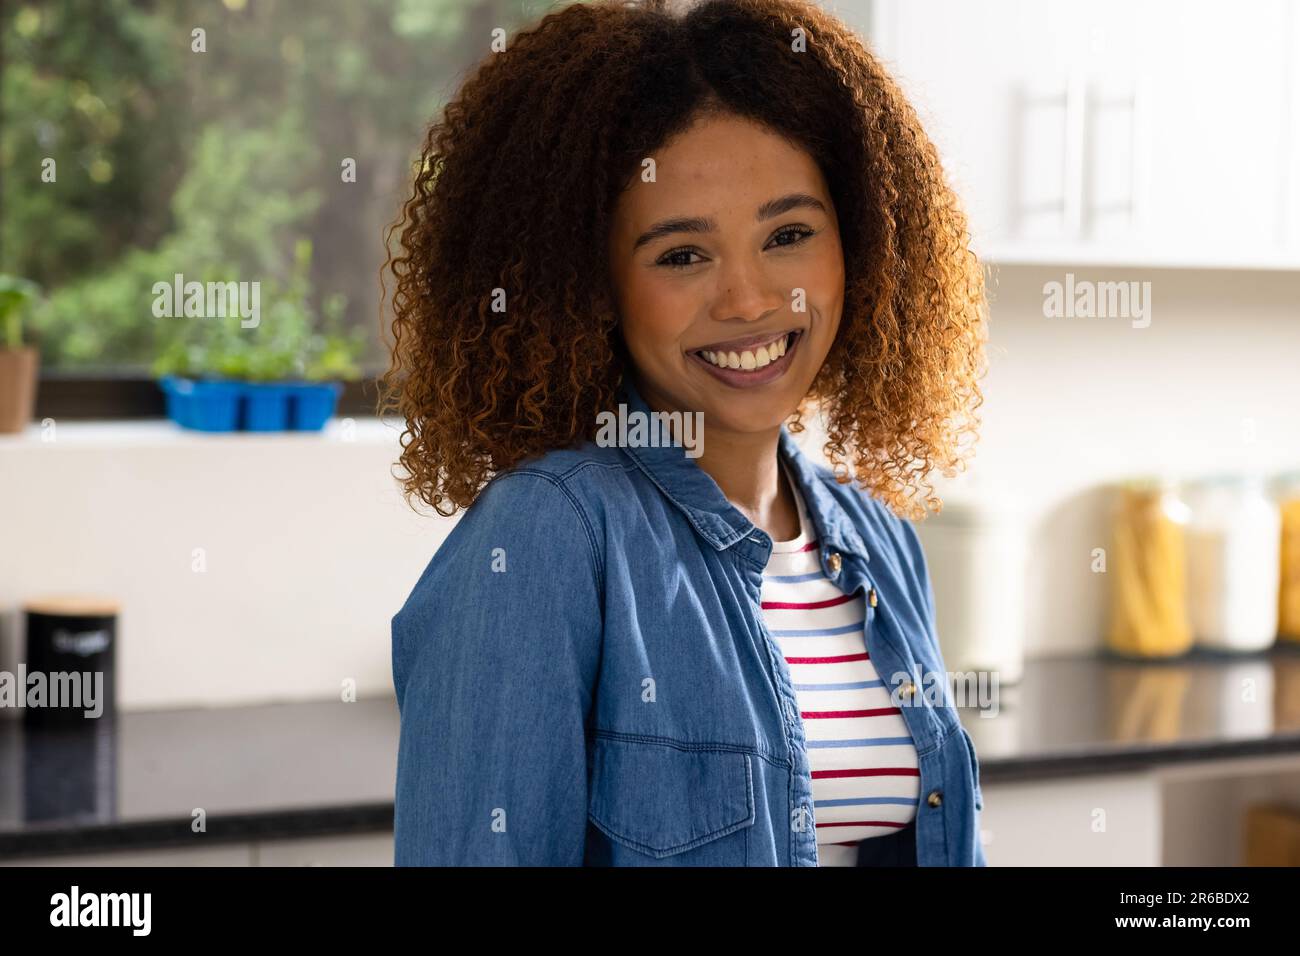 Portrait of happy biracial woman with curly hair smiling in kitchen Stock Photo